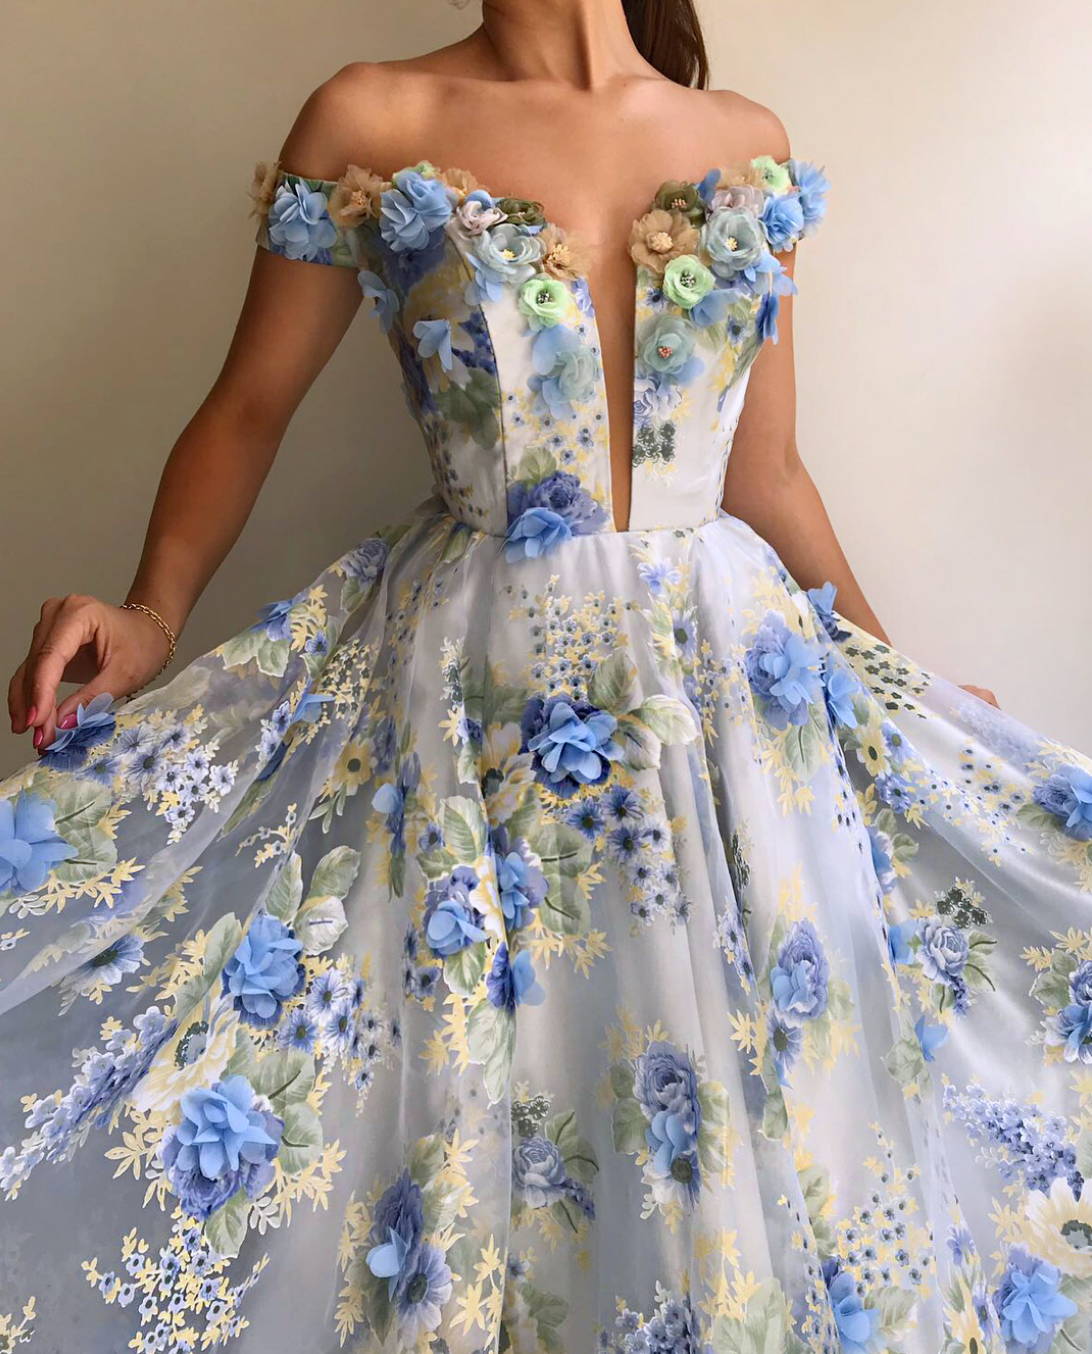 Blue A-Line dress with off the shoulder sleeves, embroidery and printed flowers